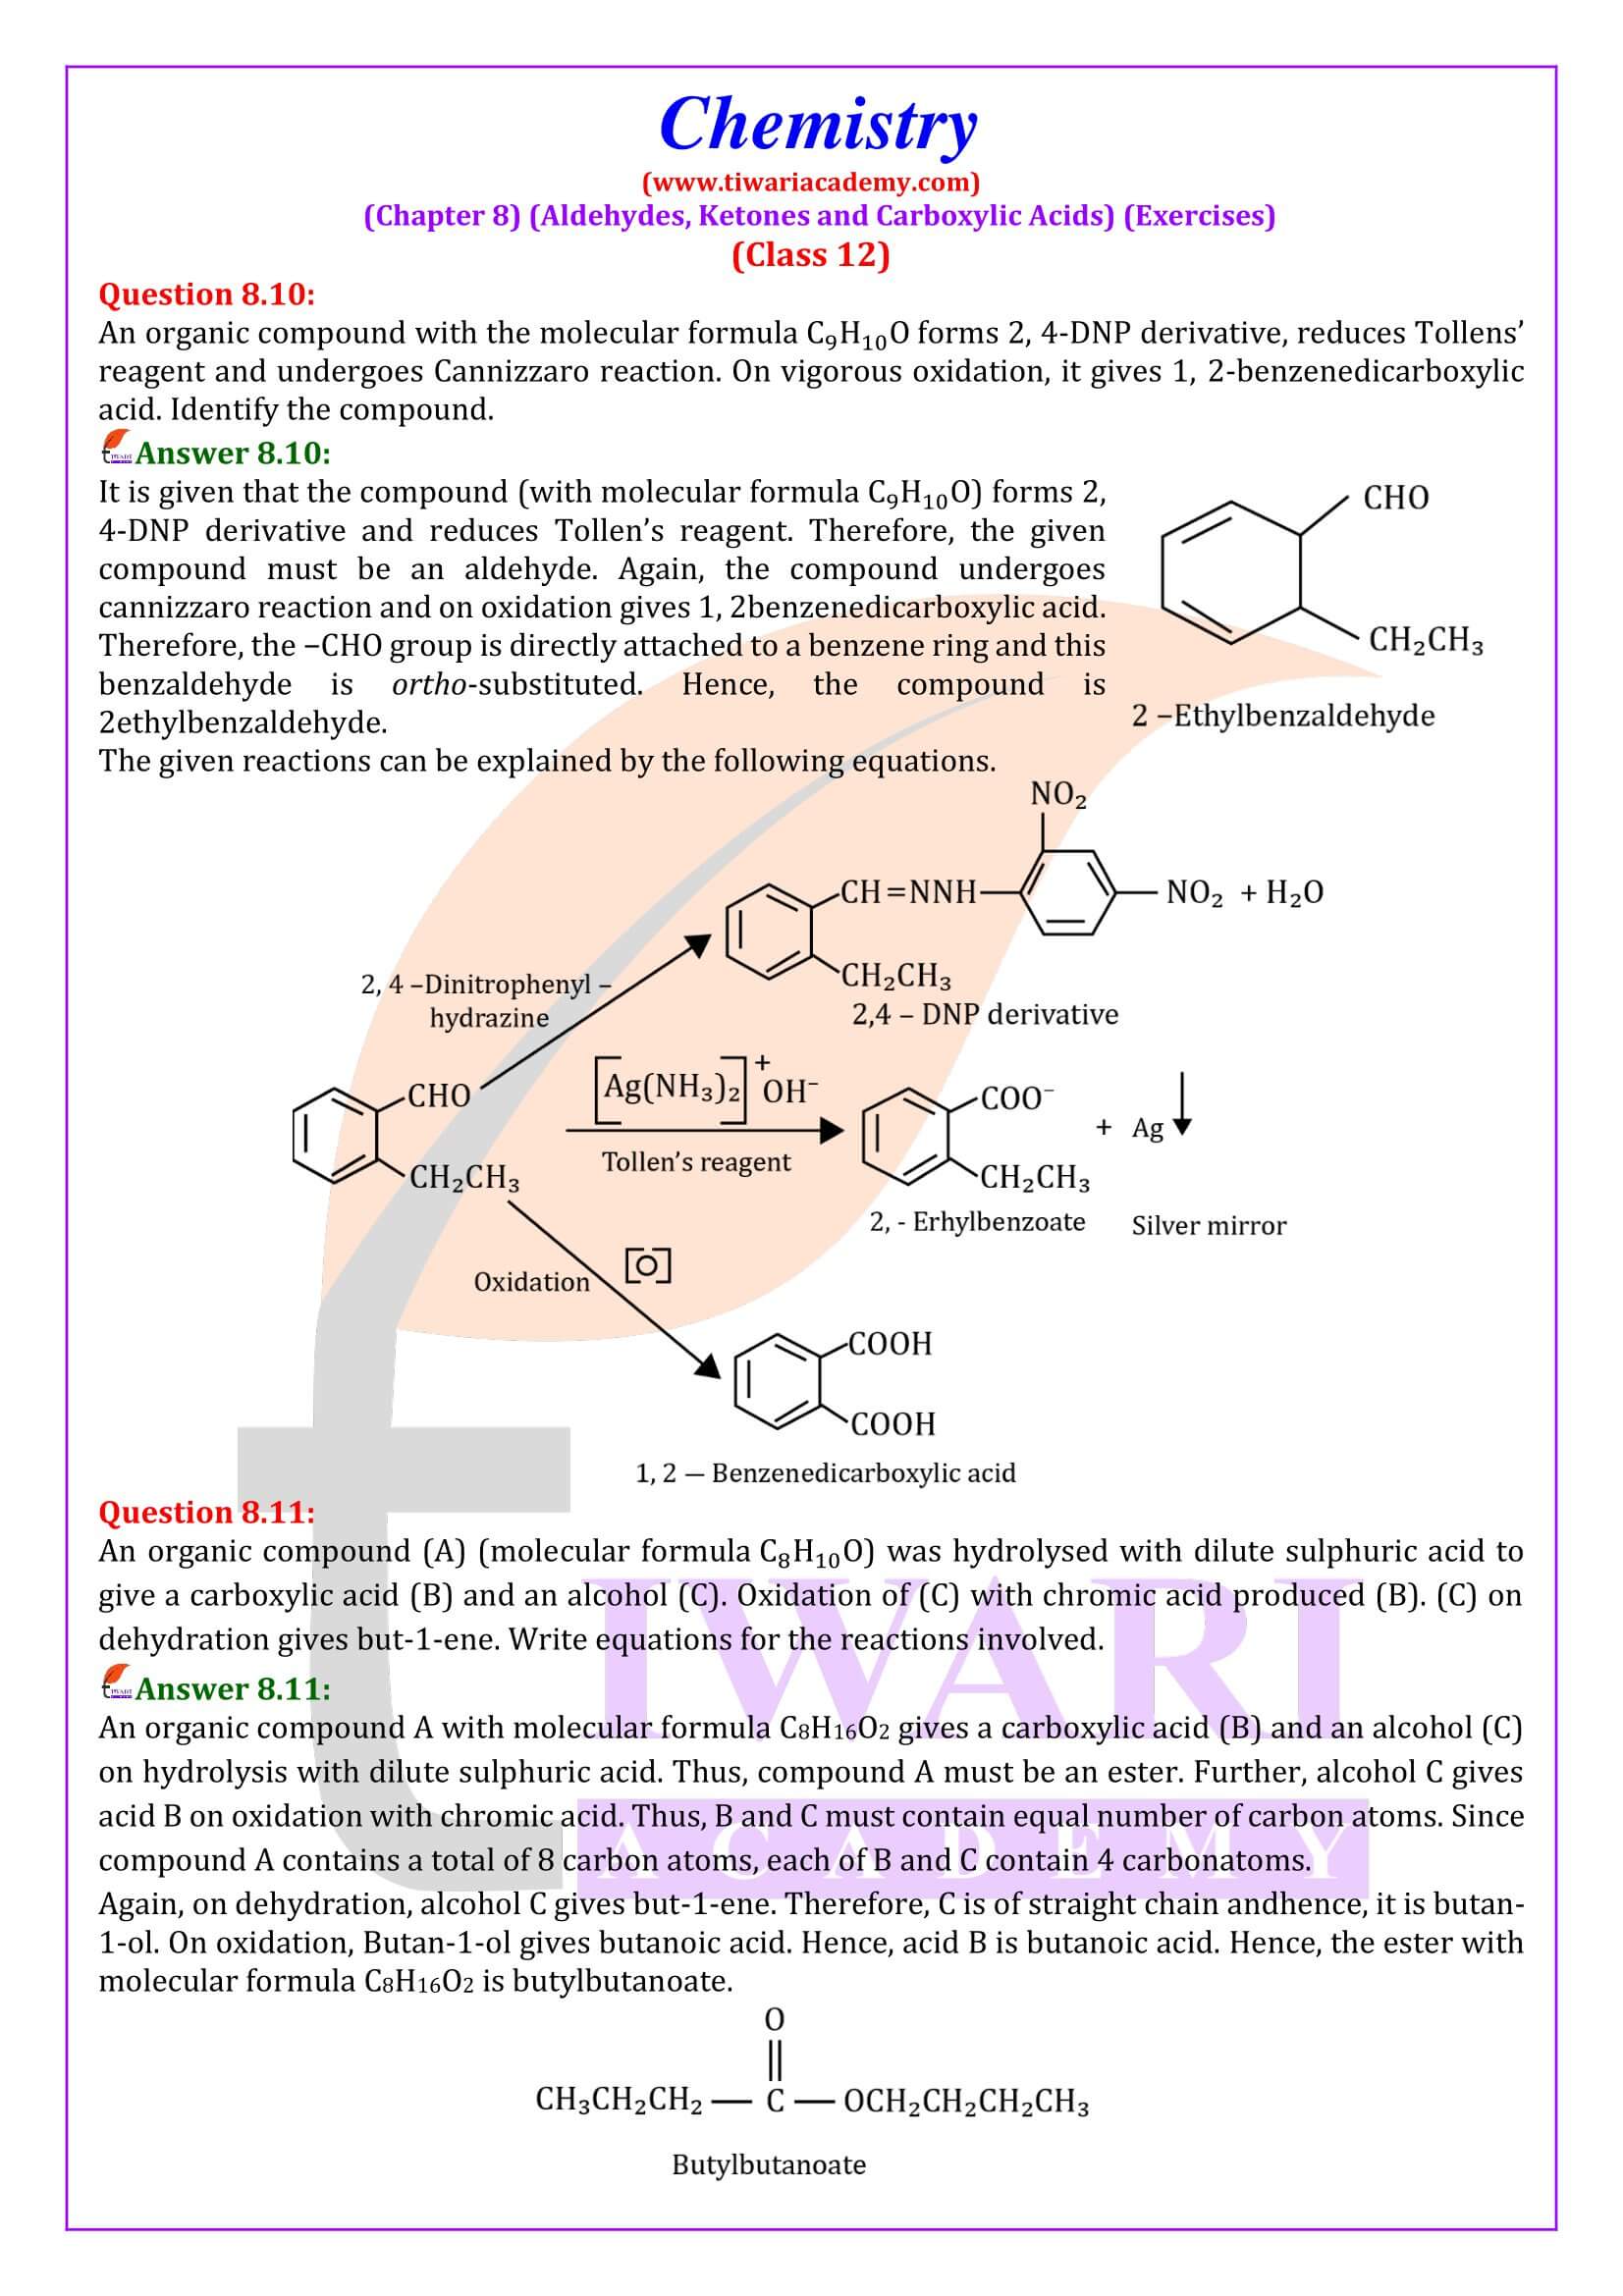 NCERT Class 12 Chemistry Chapter 8 Solution in English